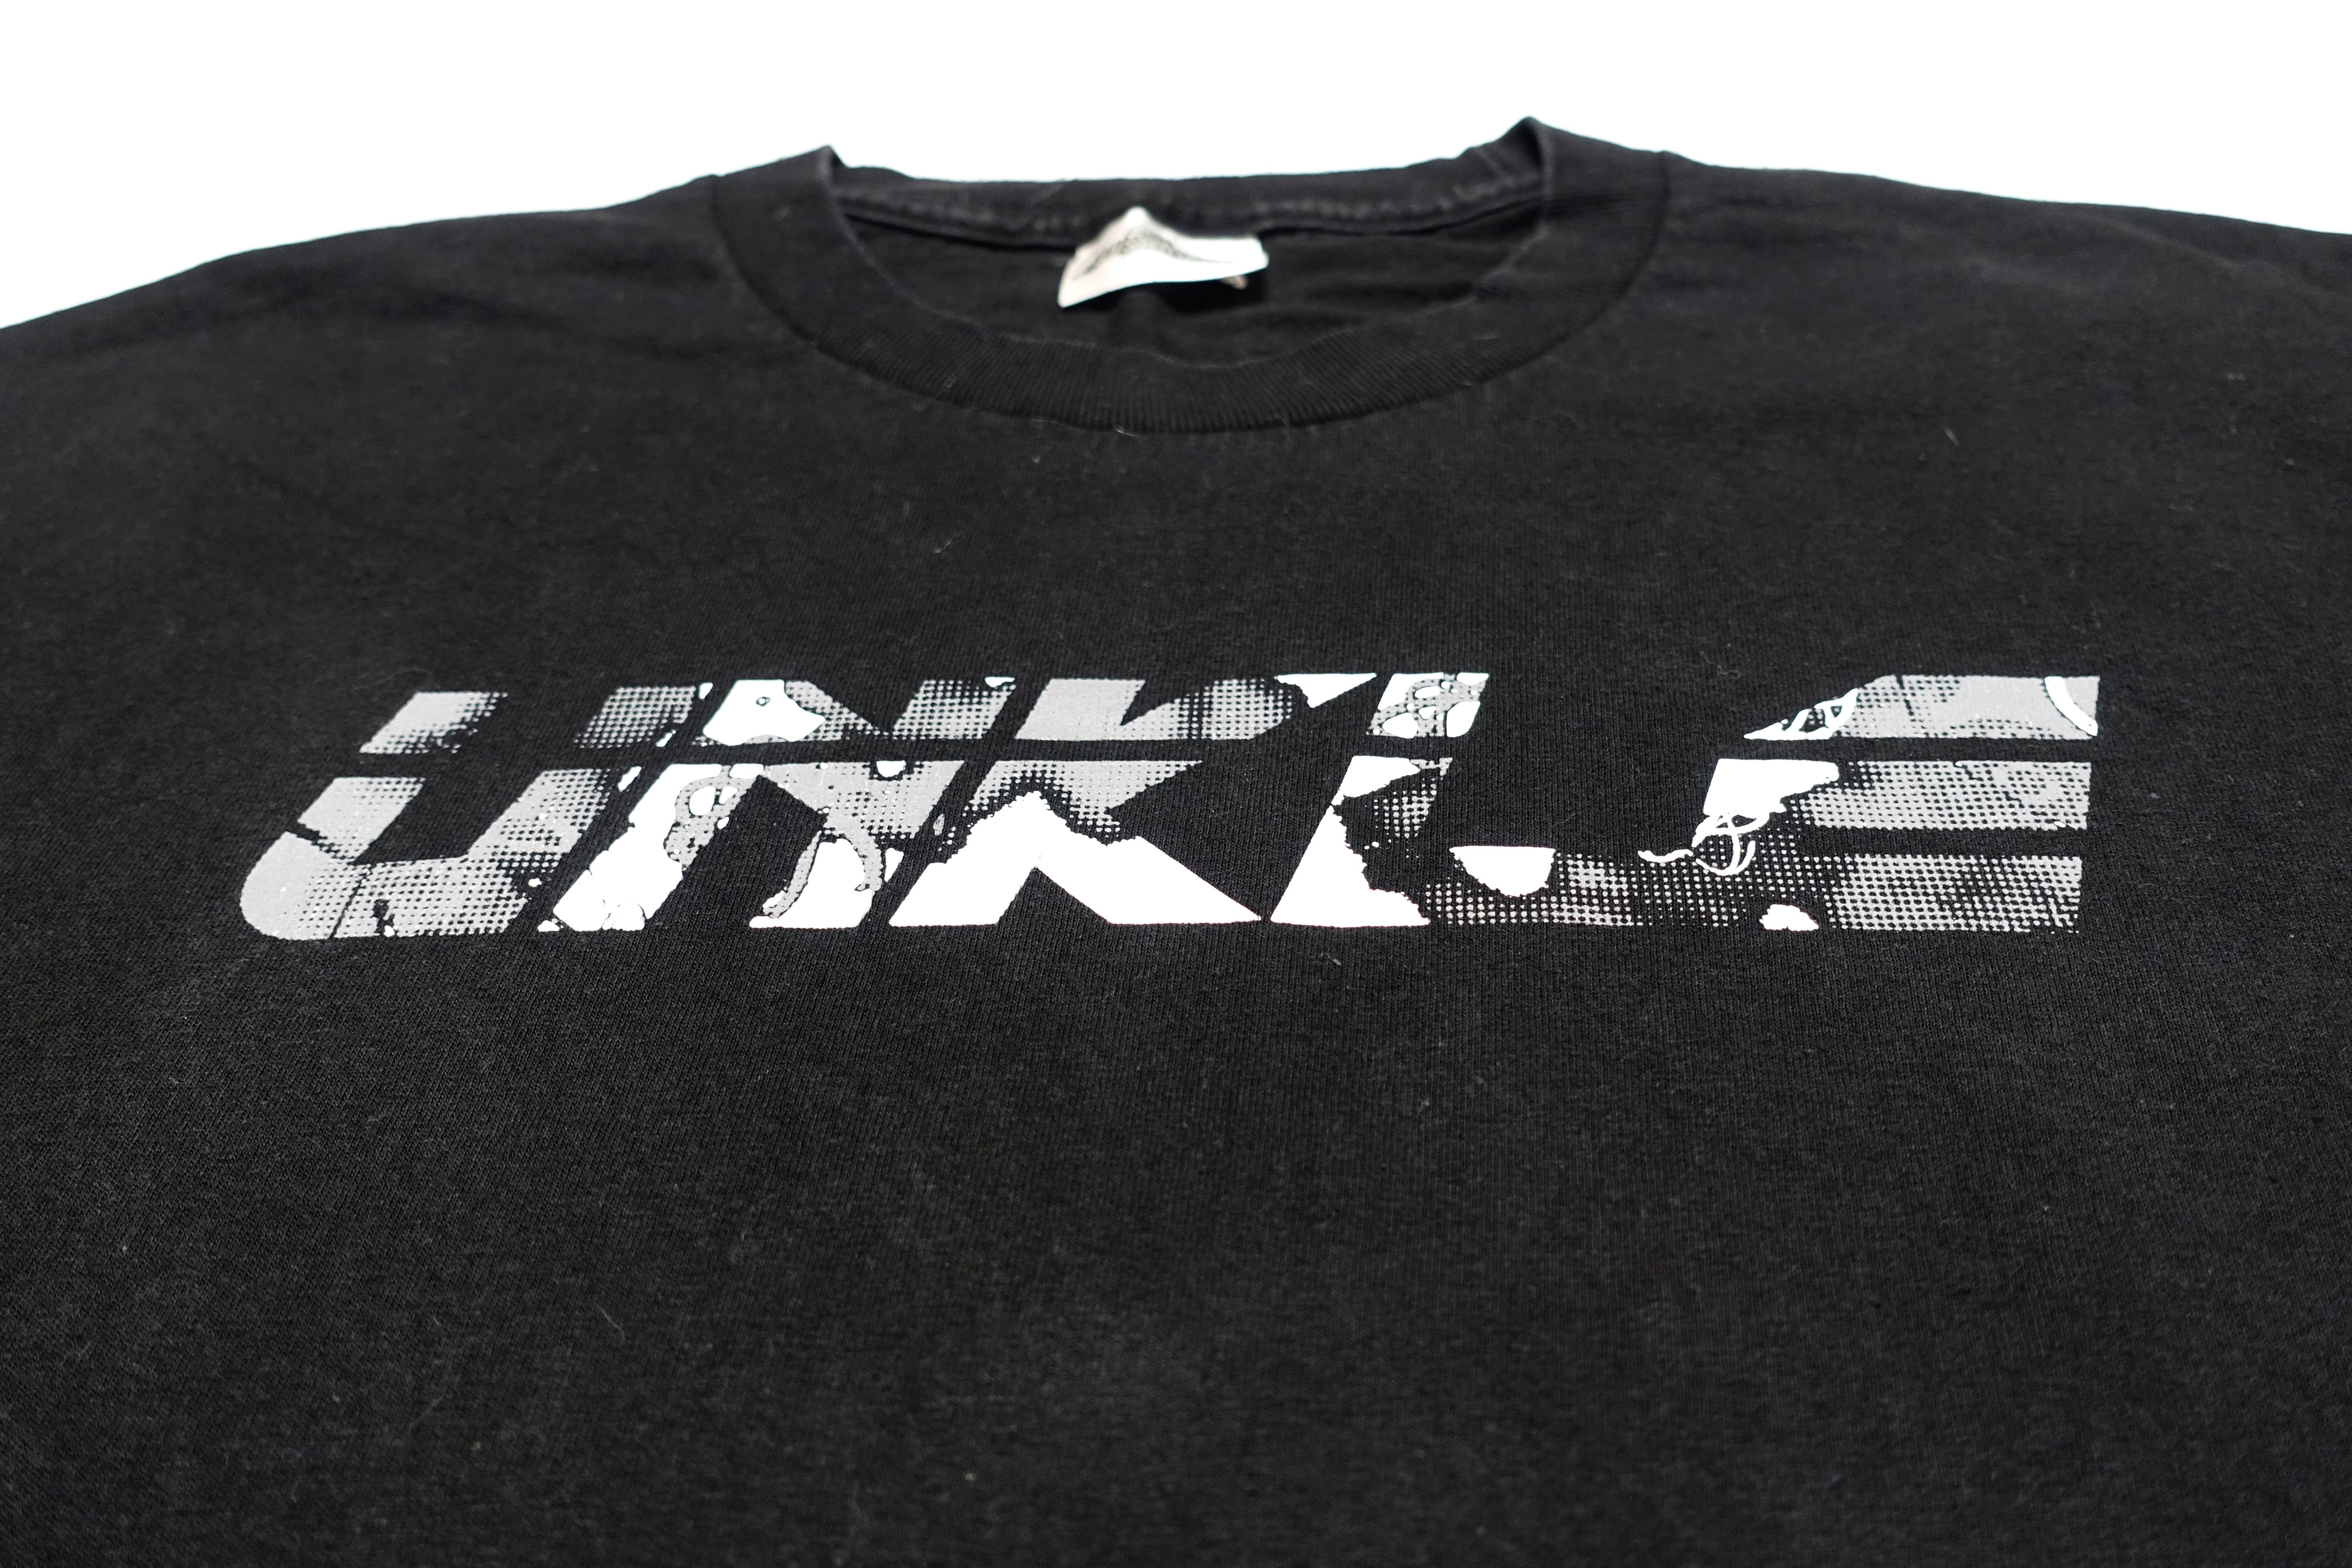 UNKLE – Never Never Land 2003 Tour Shirt Size Large